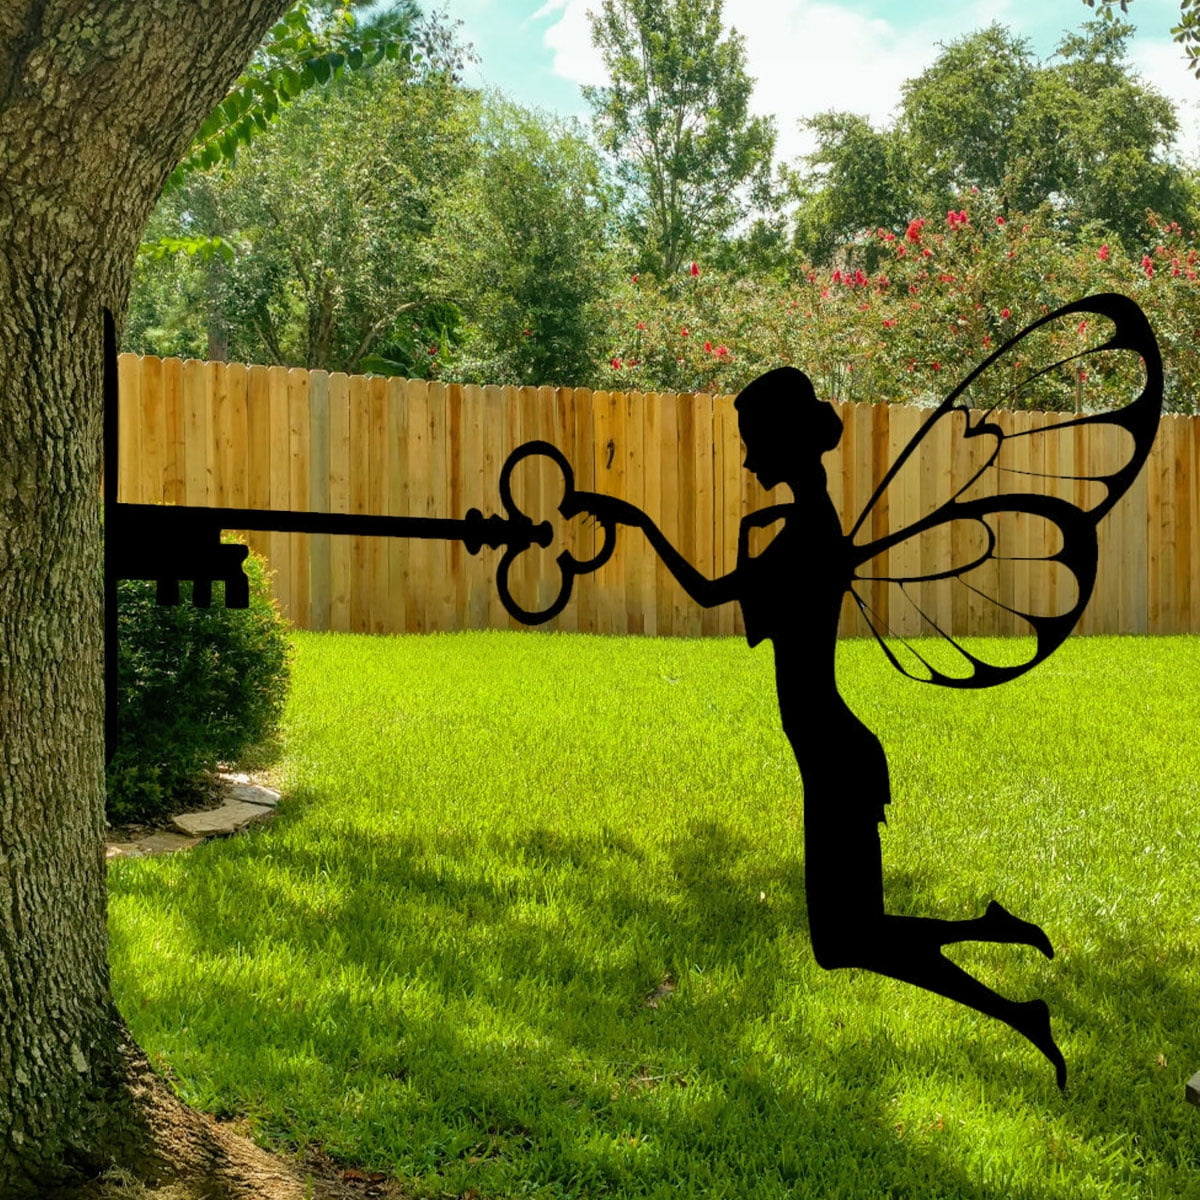 Wind Catcher ​for Garden Patio Backyard Decor,Fathers Day Unique Gifts Faries and Dandelions Dance Together Metal,Dark Metal Yard Art,Indoor Outdoor Lawn Pathway Patio Ornaments A 